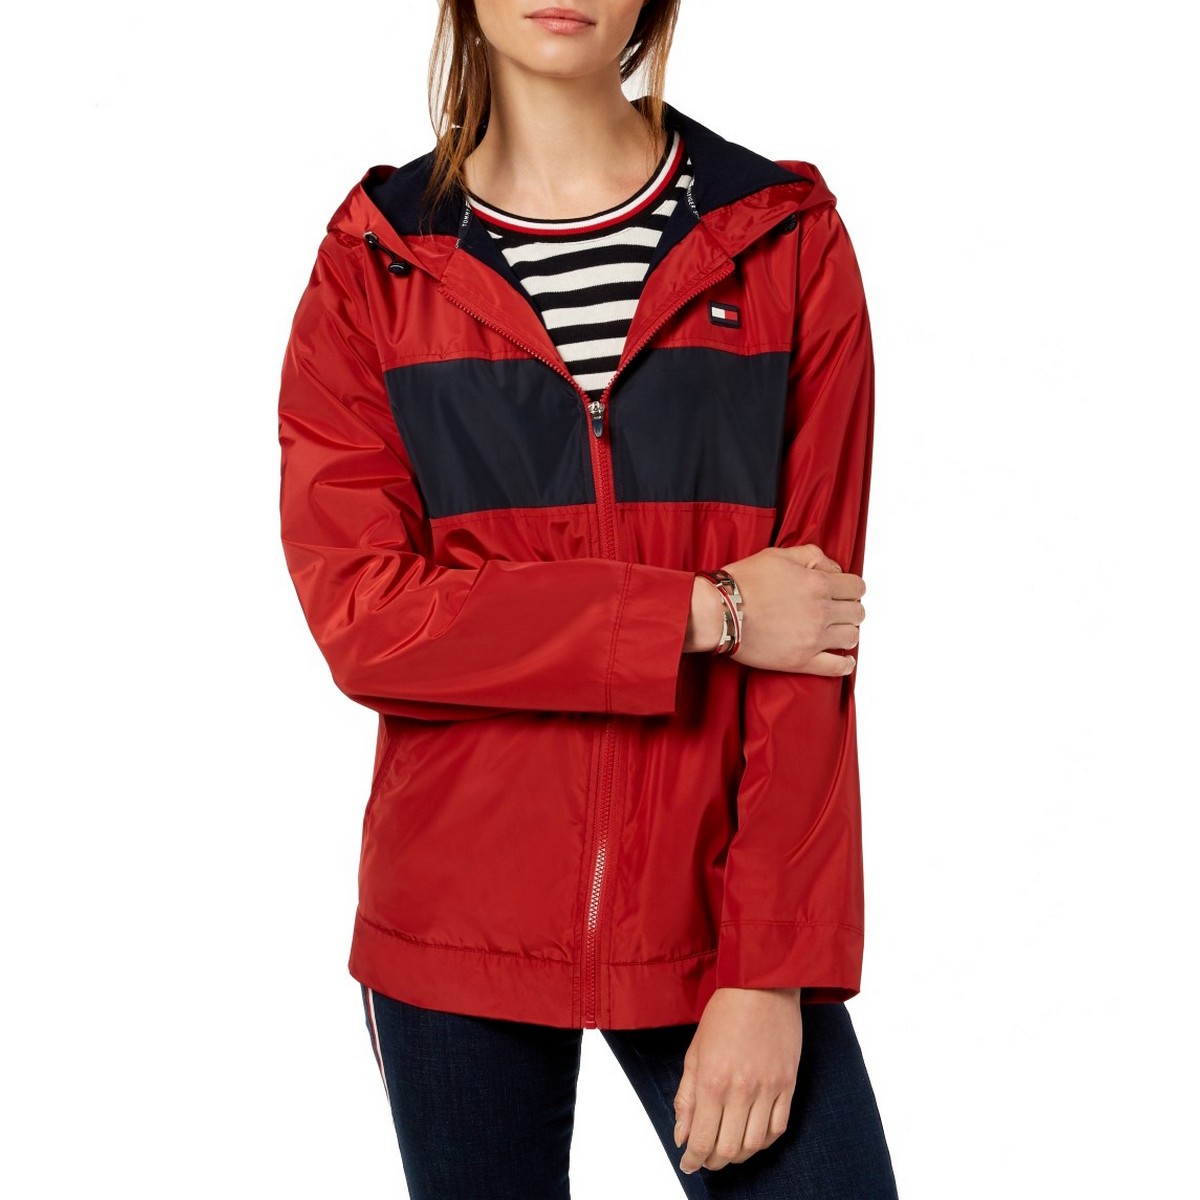 womens red tommy hilfiger jacket